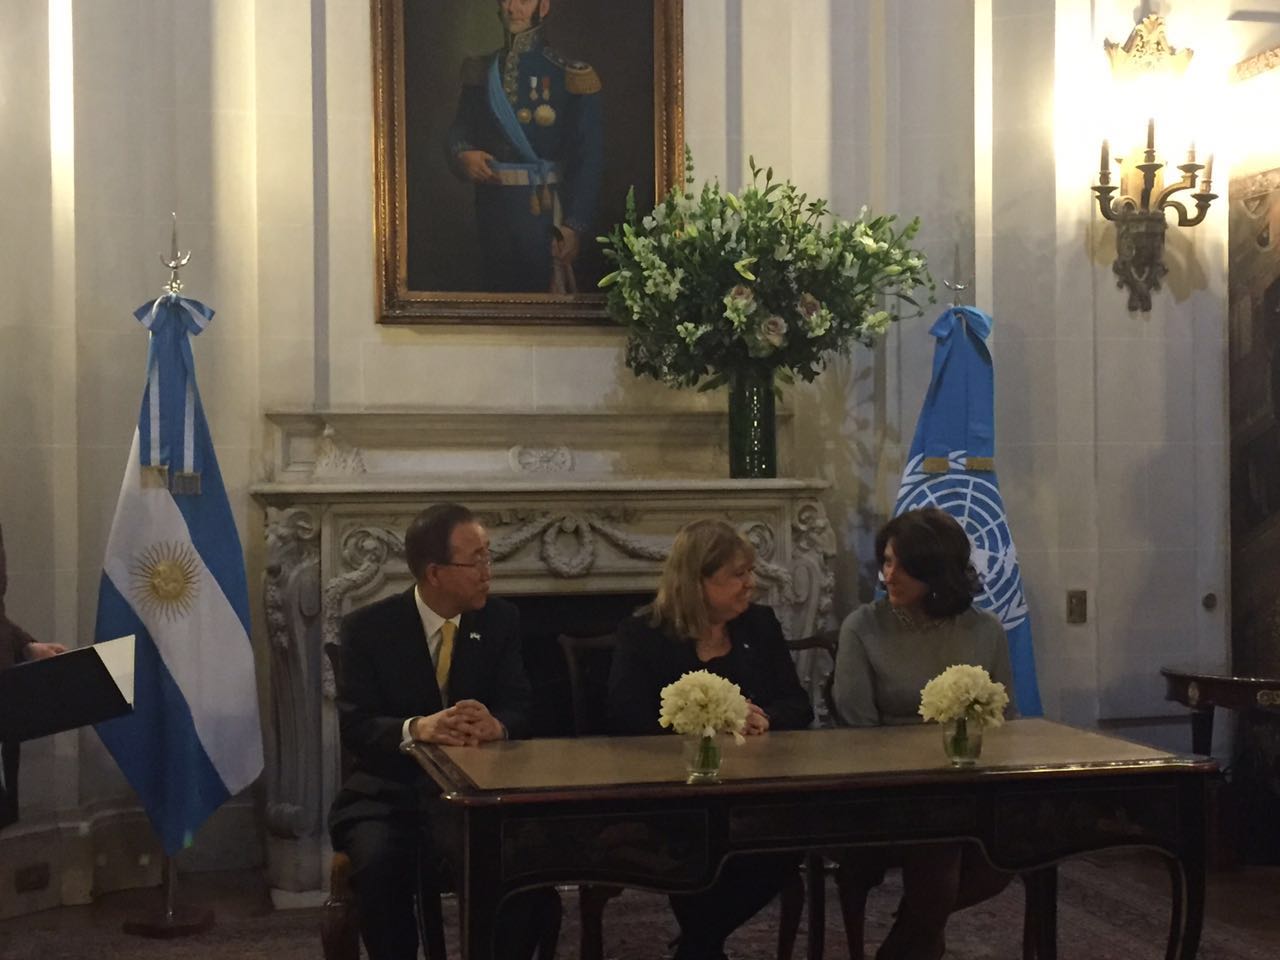 The subscription was made between the Chancellor of the Republic of Argentina, Susana Malcorra and UN Women Regional Director, Luiza Carvalho, with the presence of UN Secretary-General, Ban Ki-moon 